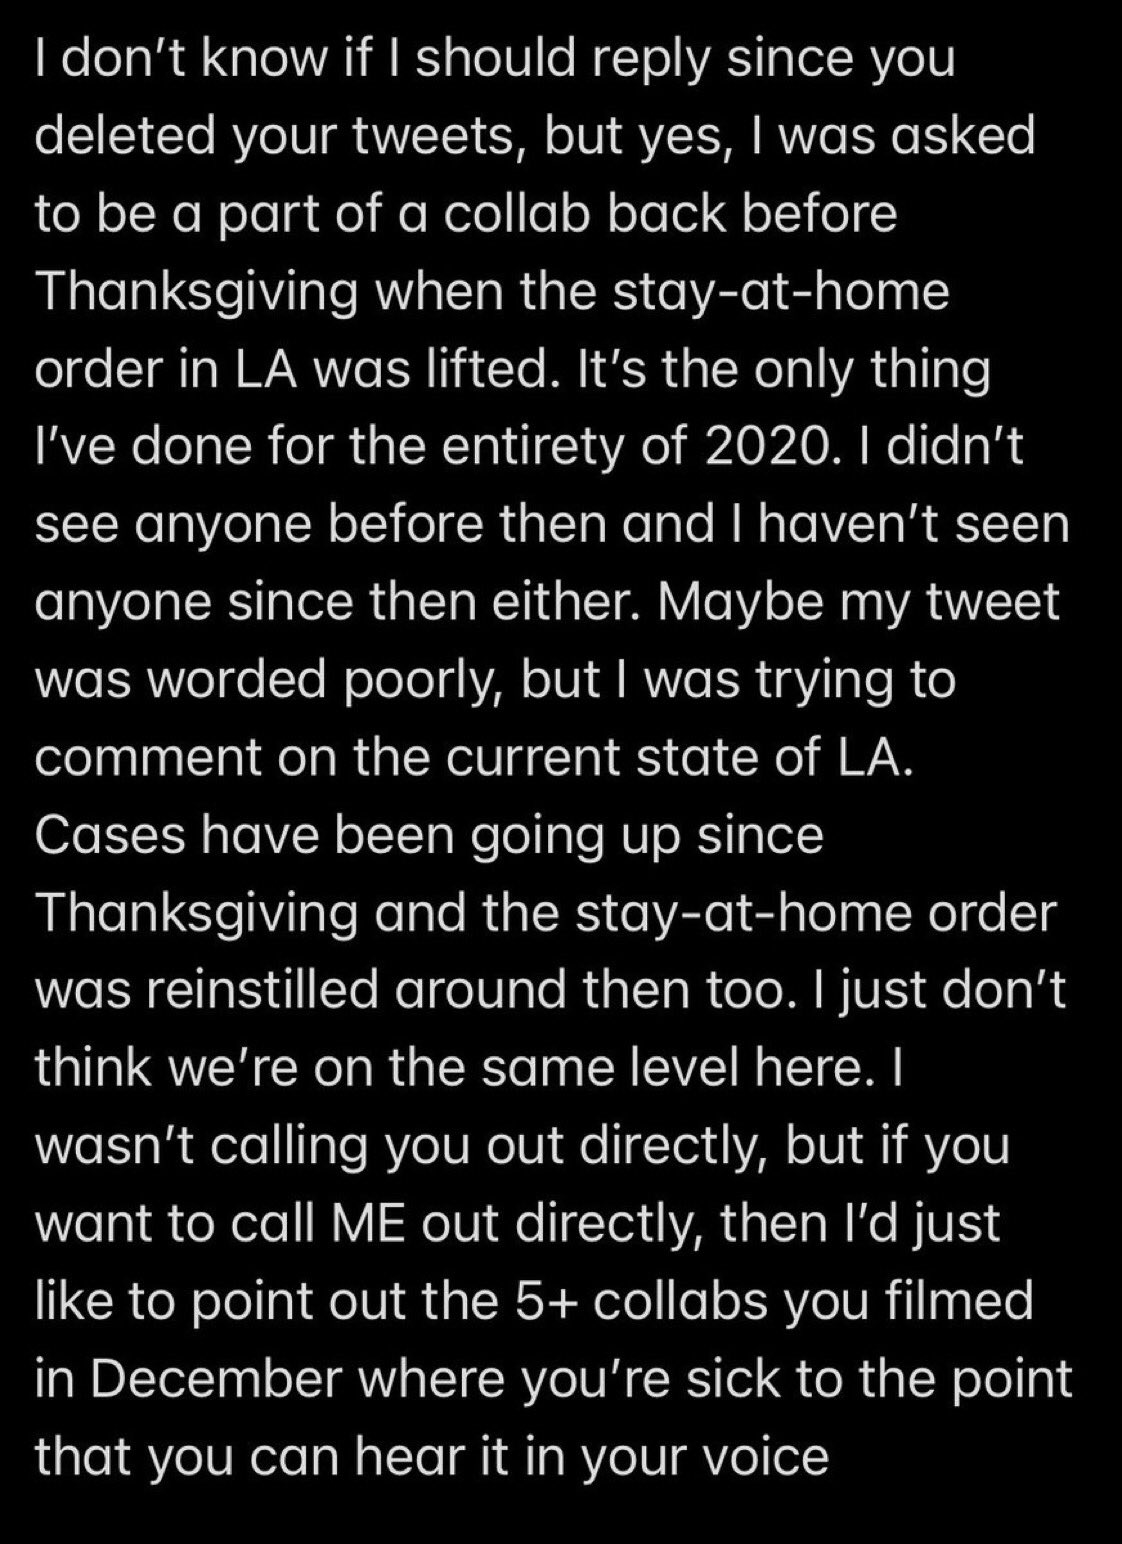 Jenn McAllister Responds Call Out By James Charles on Twitter